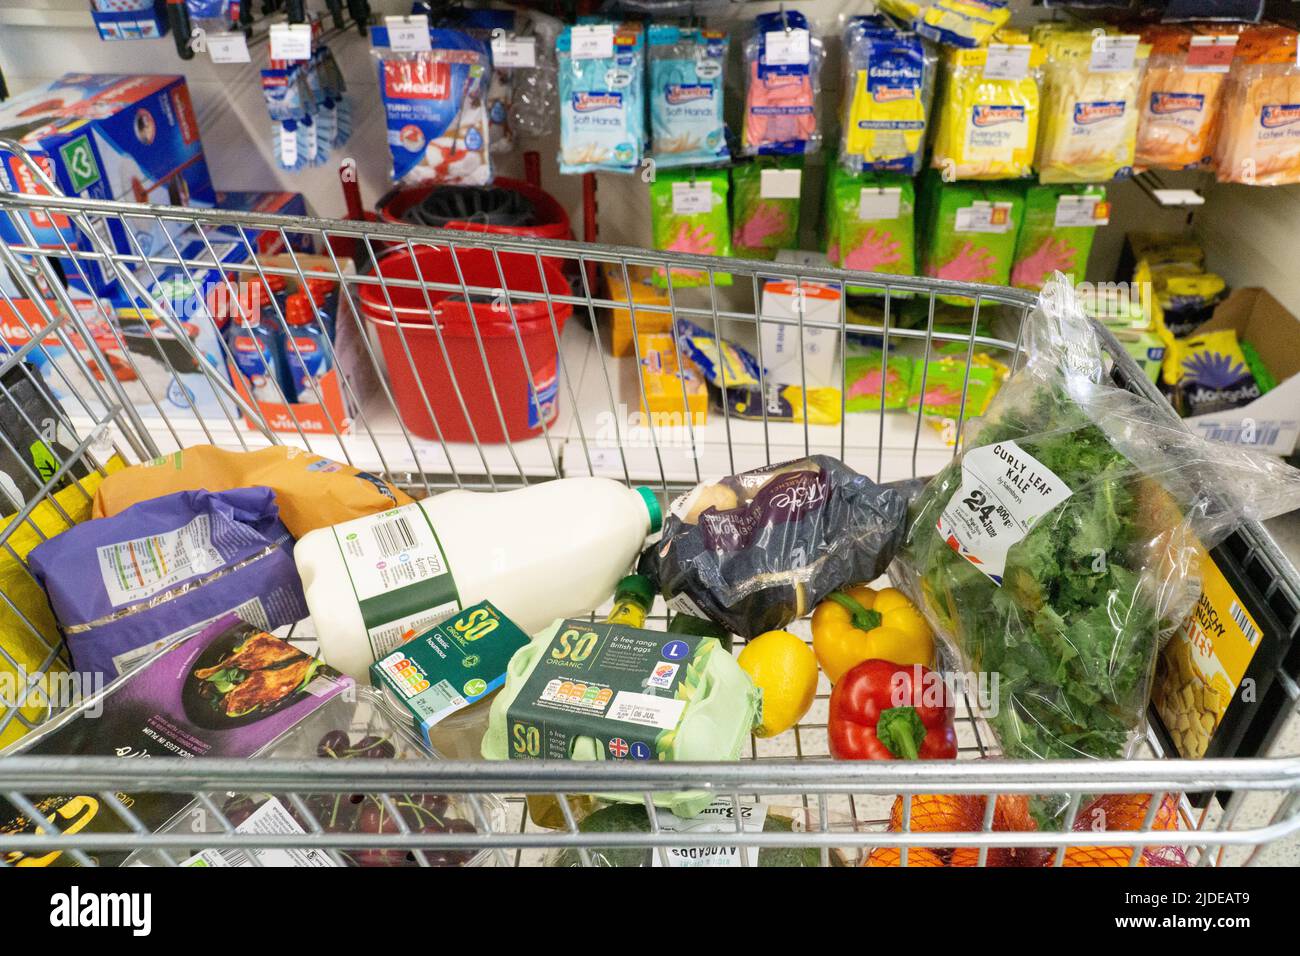 London, UK, 20 June 2022: a shopping trolly of groceries in a branch of Sainsbury's. The cost of living crisis is creating real difficulties for many people and the rate of inflation is expected to rise to 11% by this autumn, due to Brexit, the war in Ukraine and post-covid problems. Anna Watson/Alamy Live News Stock Photo